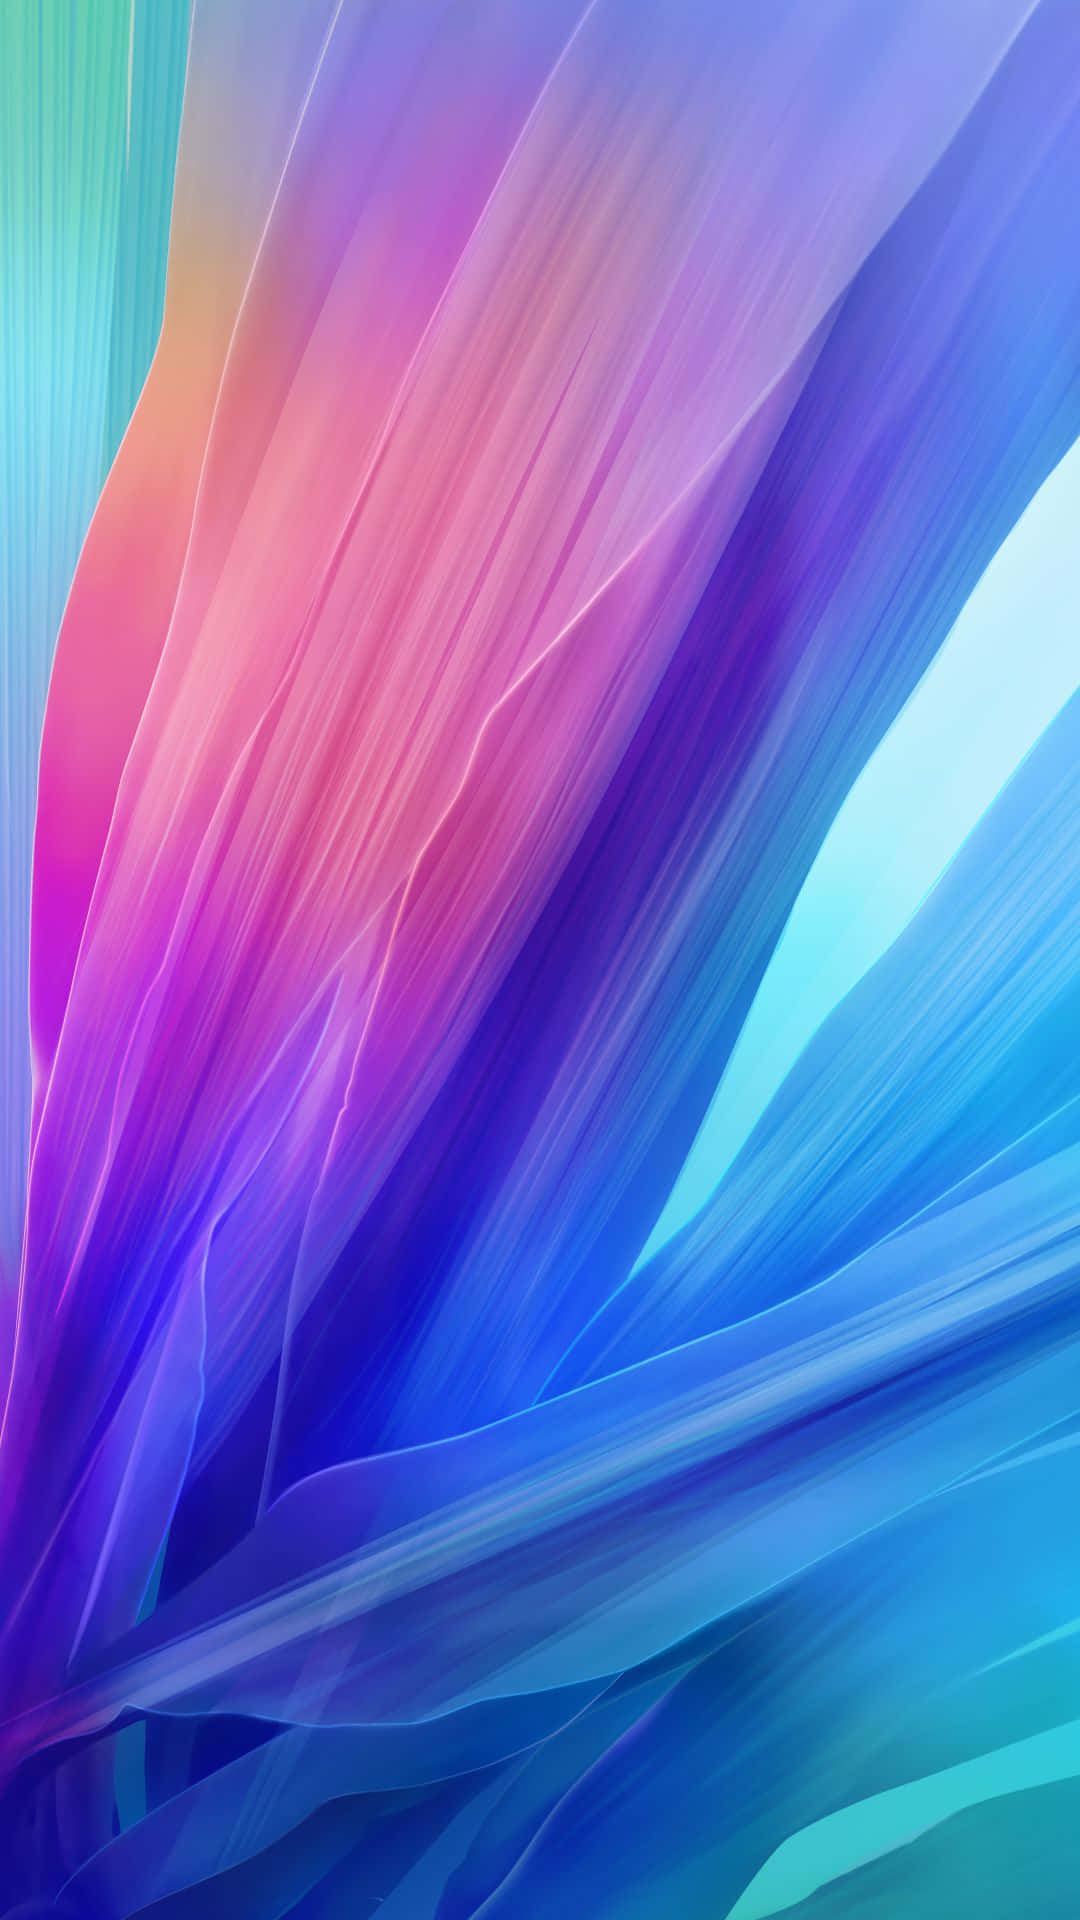 Iphone 7 Plus Live Feathery Structure Wallpaper